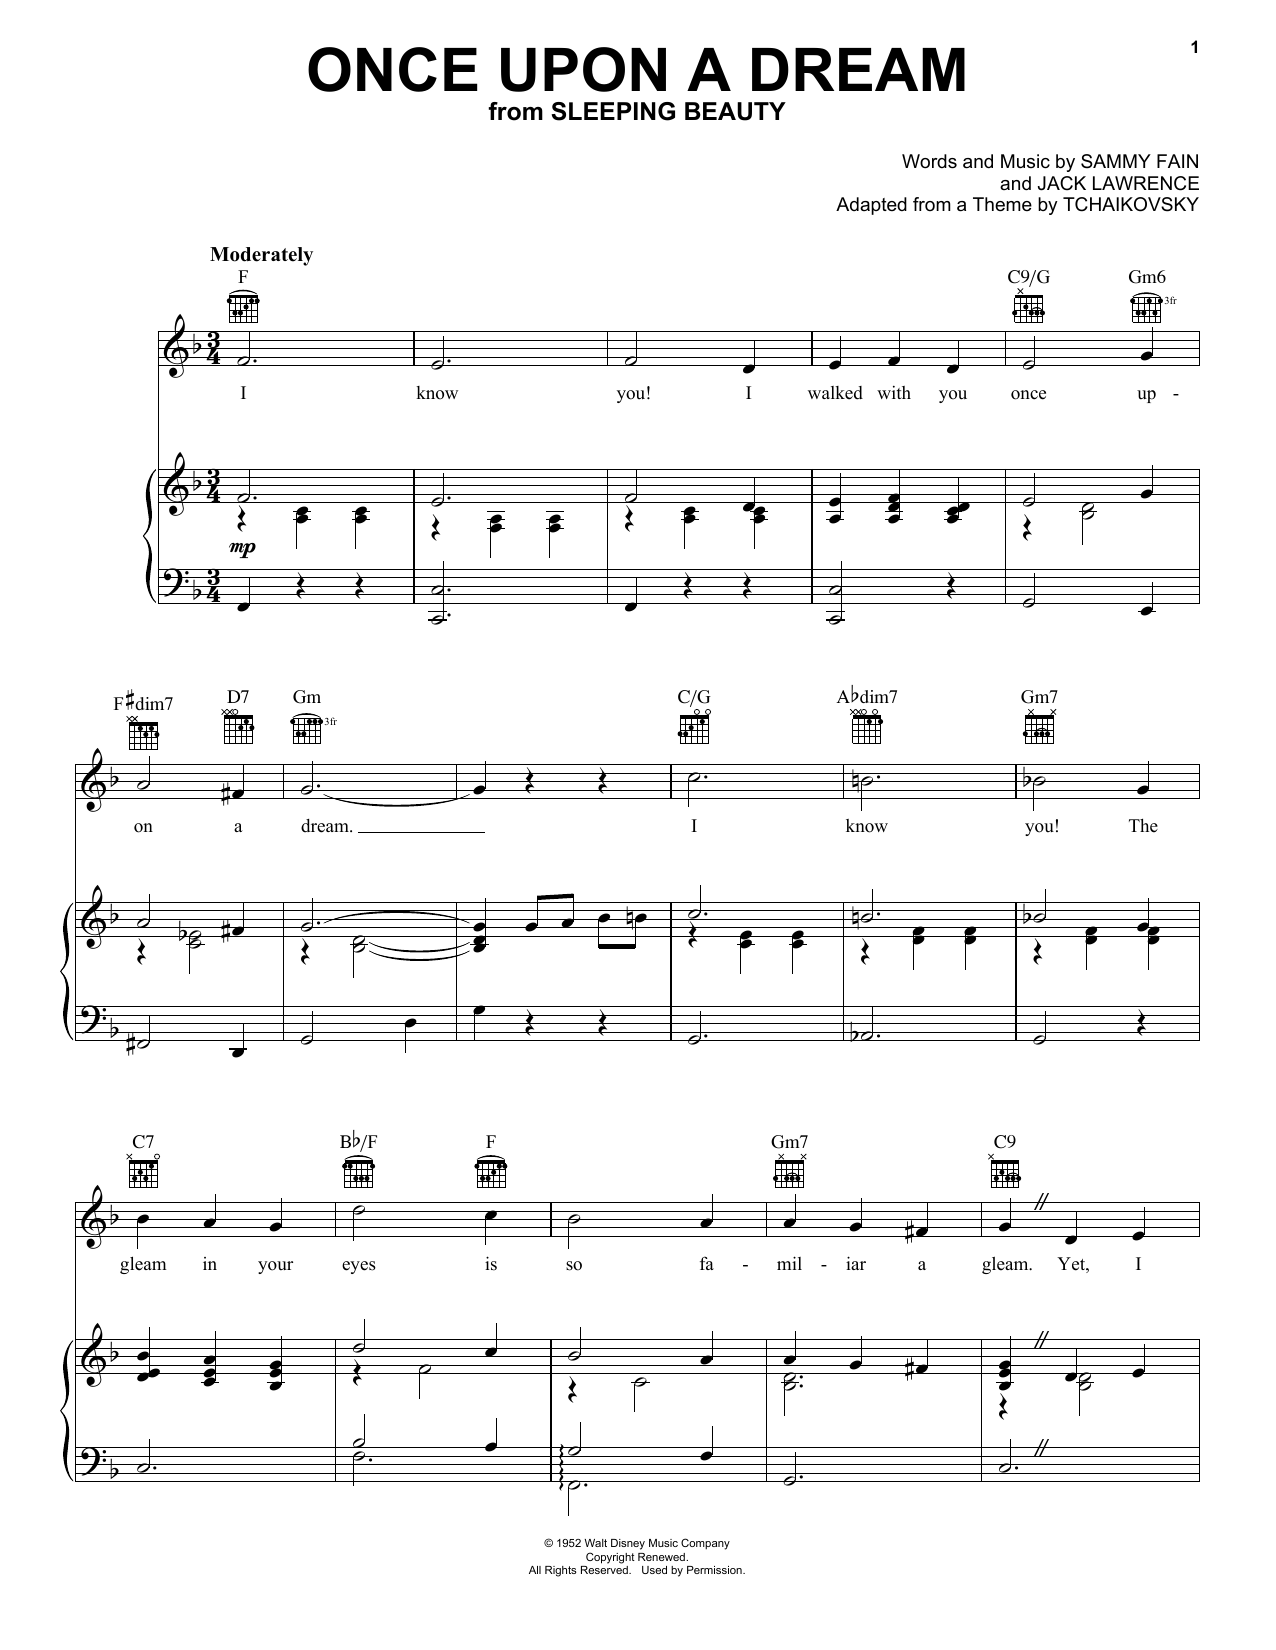 Sammy Fain Once Upon A Dream sheet music notes and chords. Download Printable PDF.